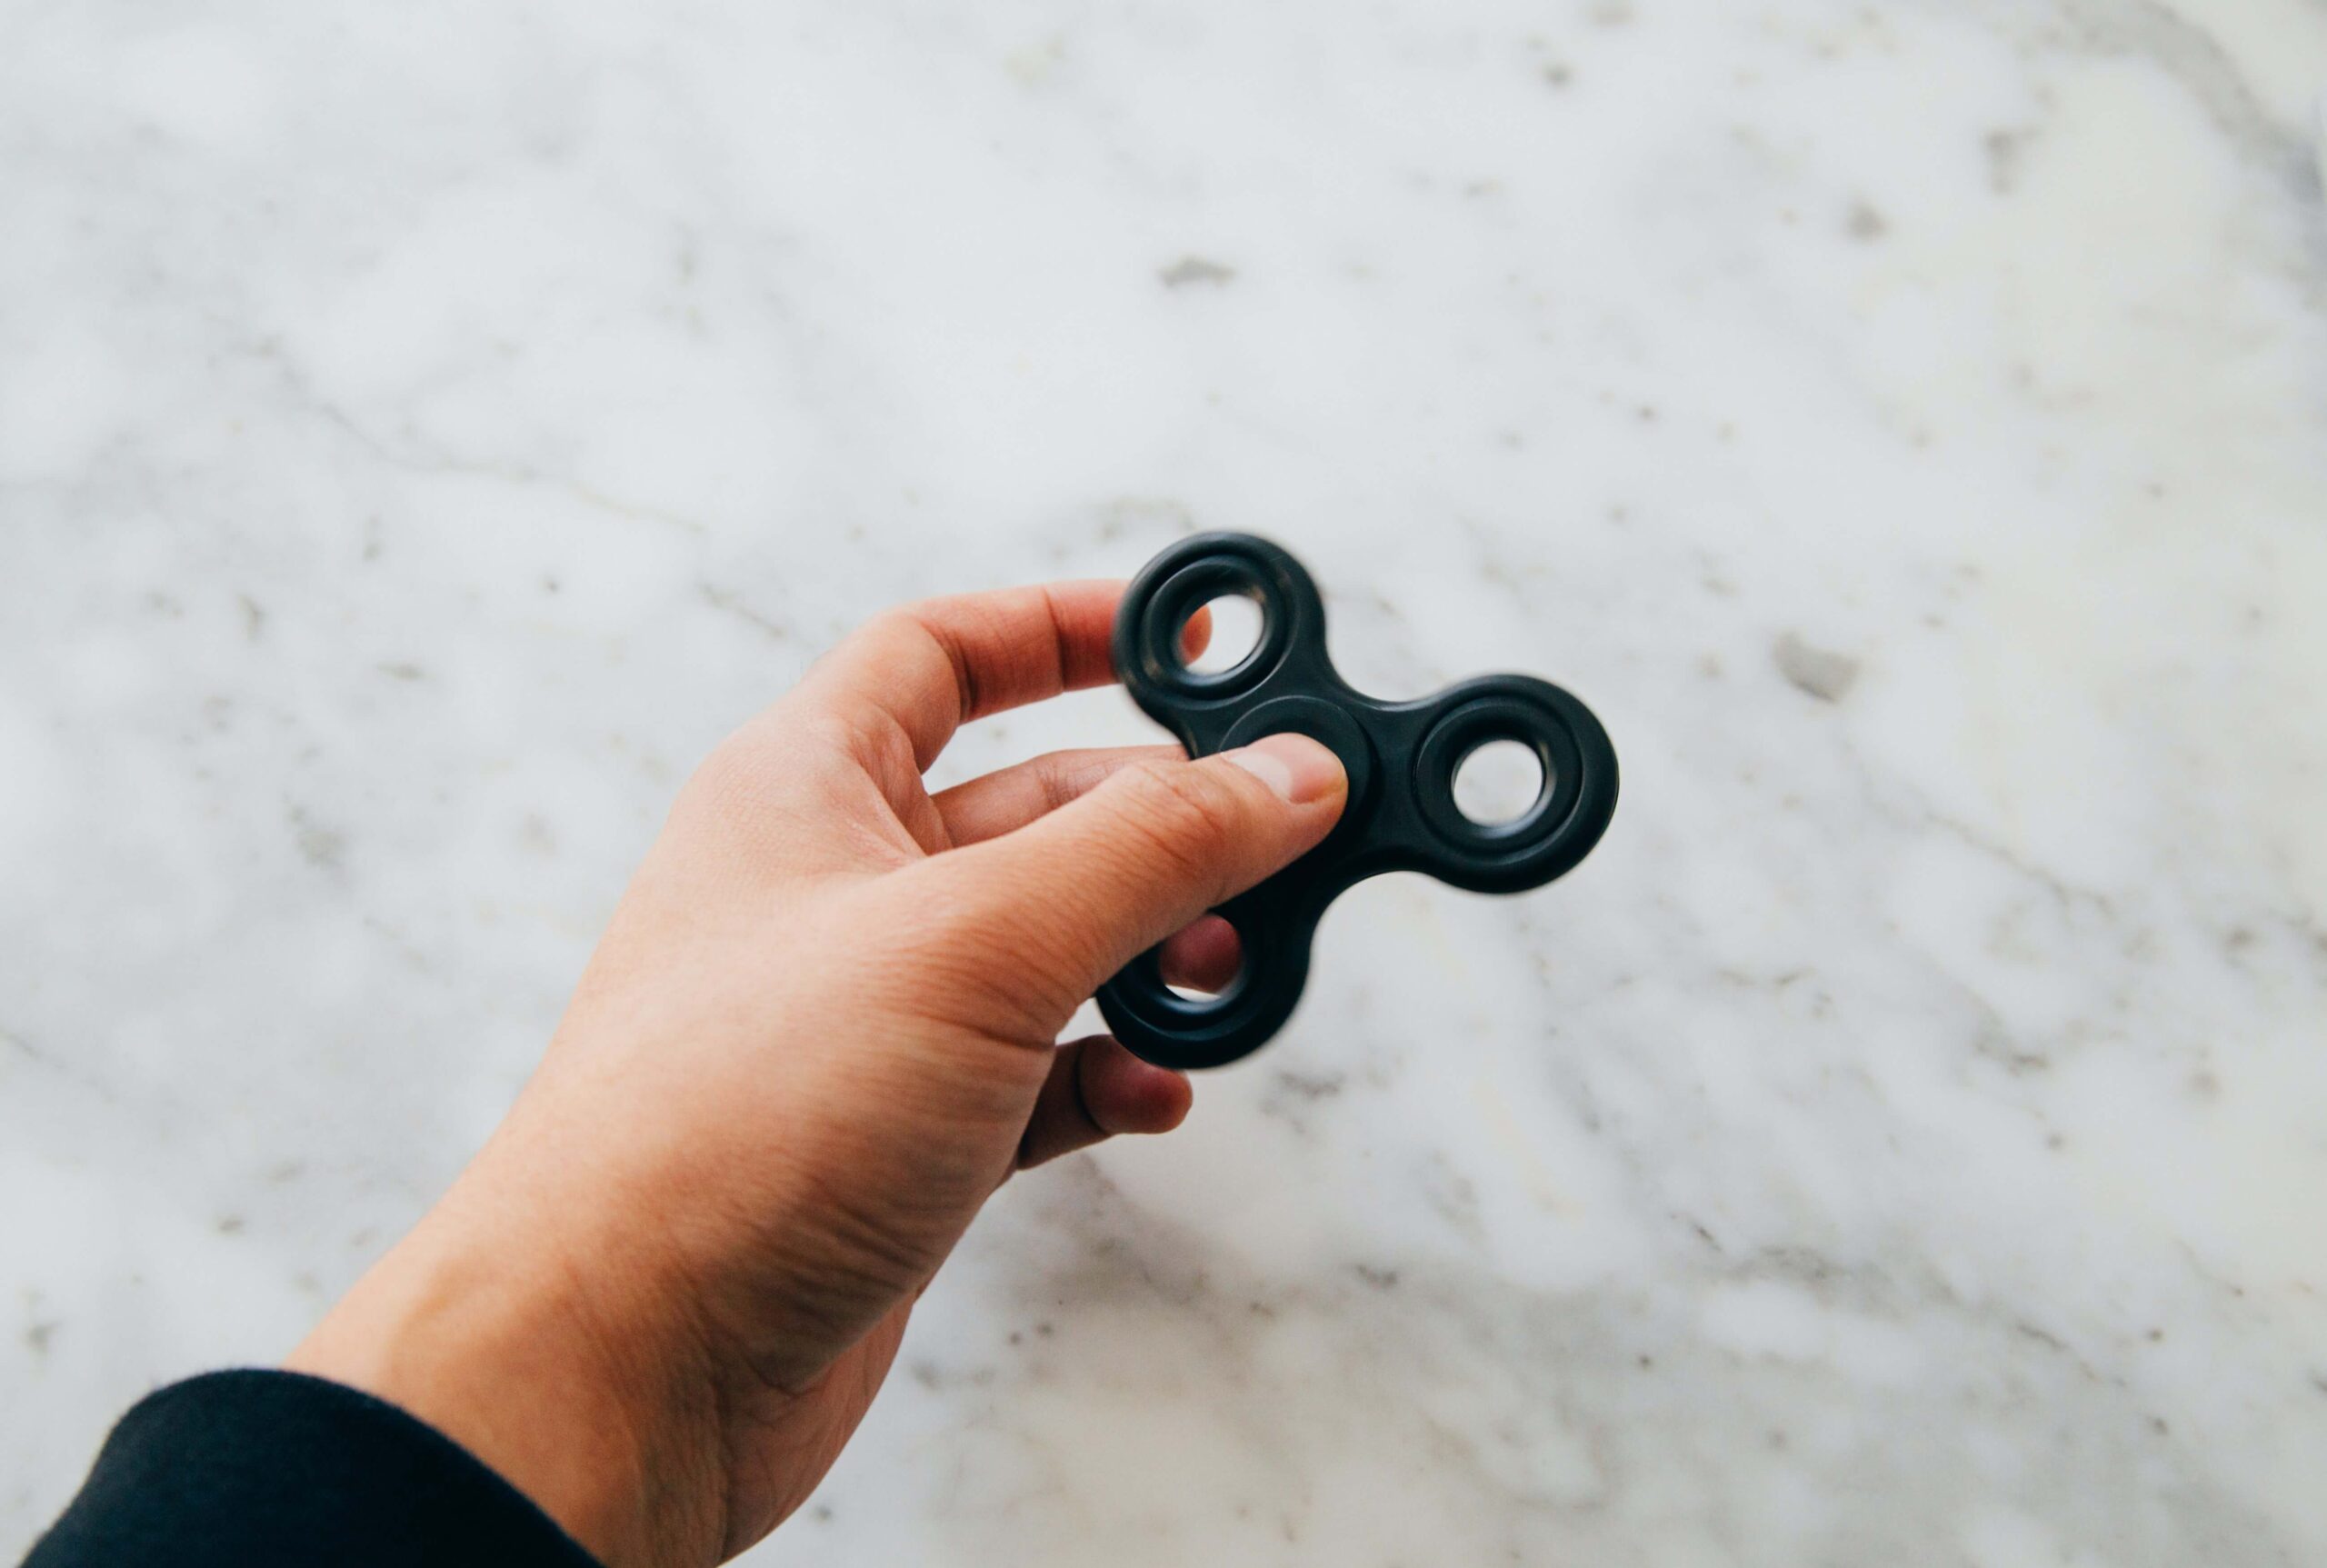 How to replace bearings in fidget spinner